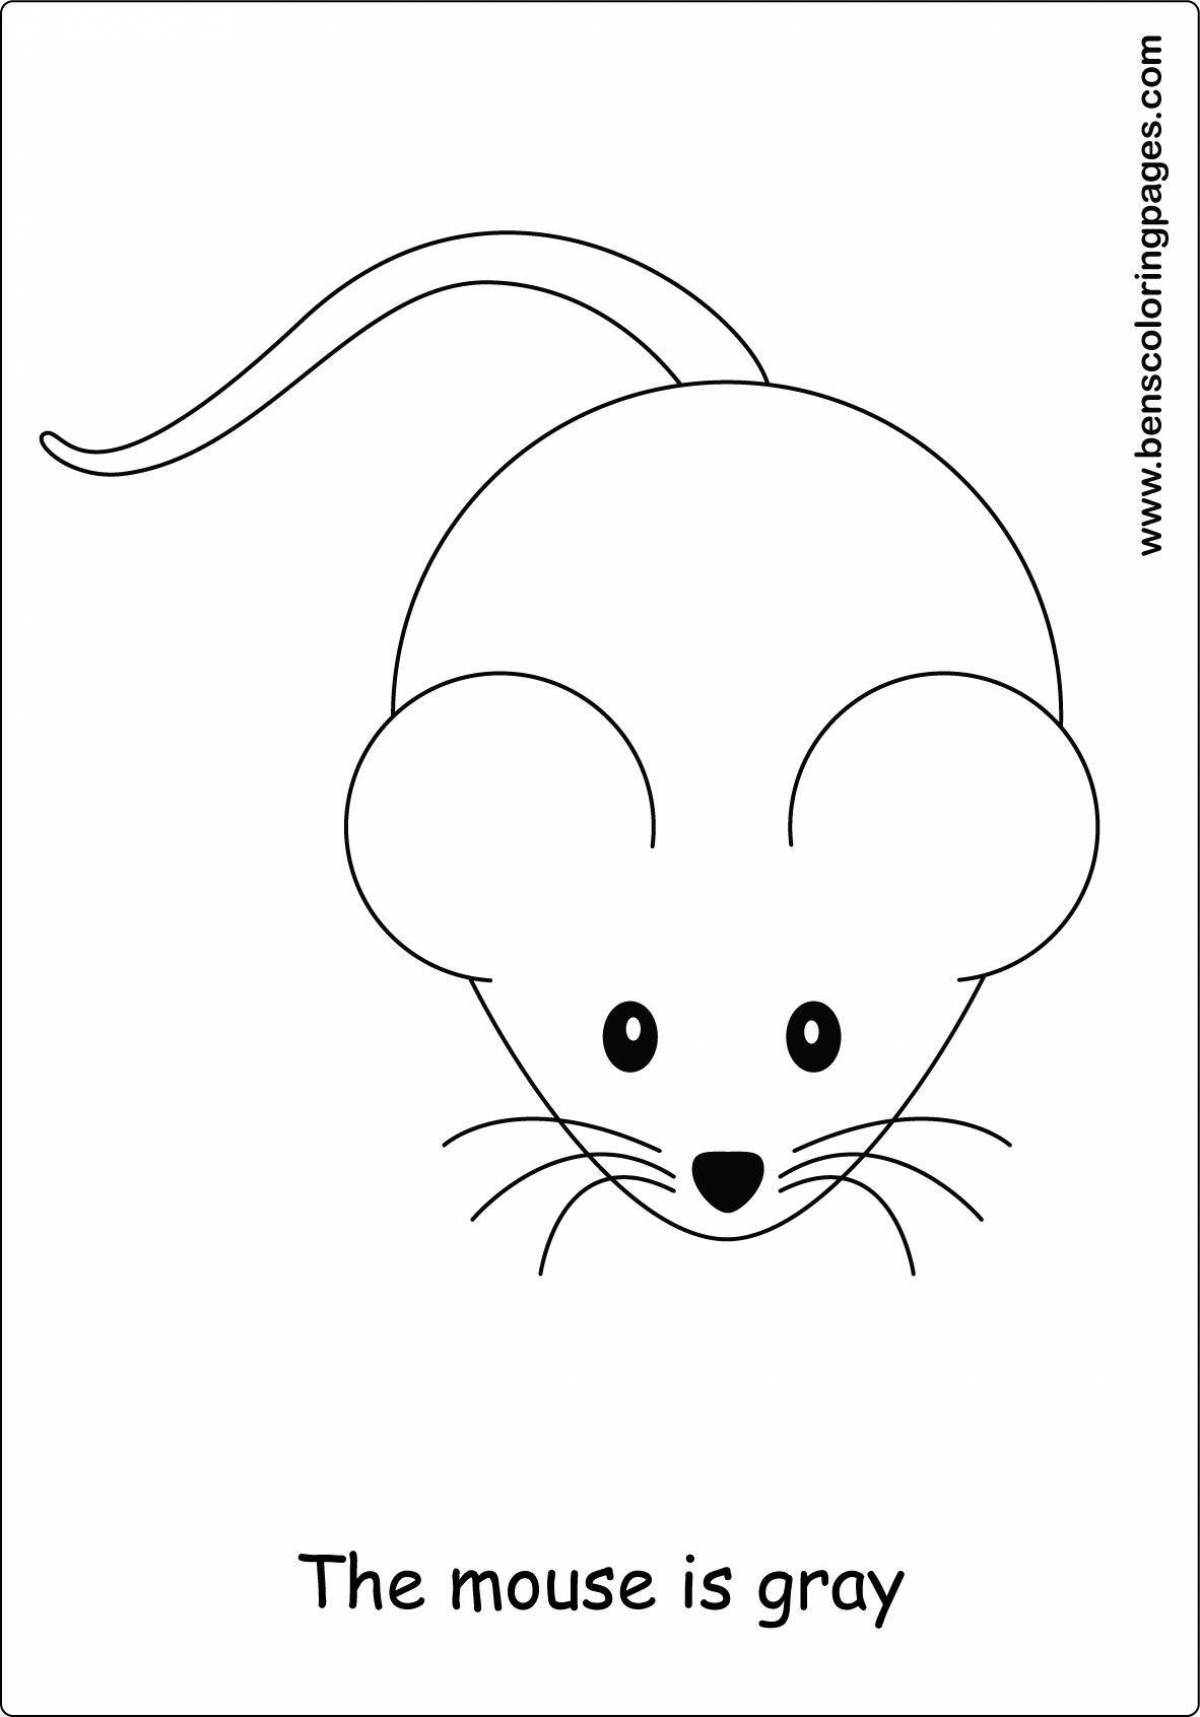 Amazing mouse coloring book for kids 2-3 years old